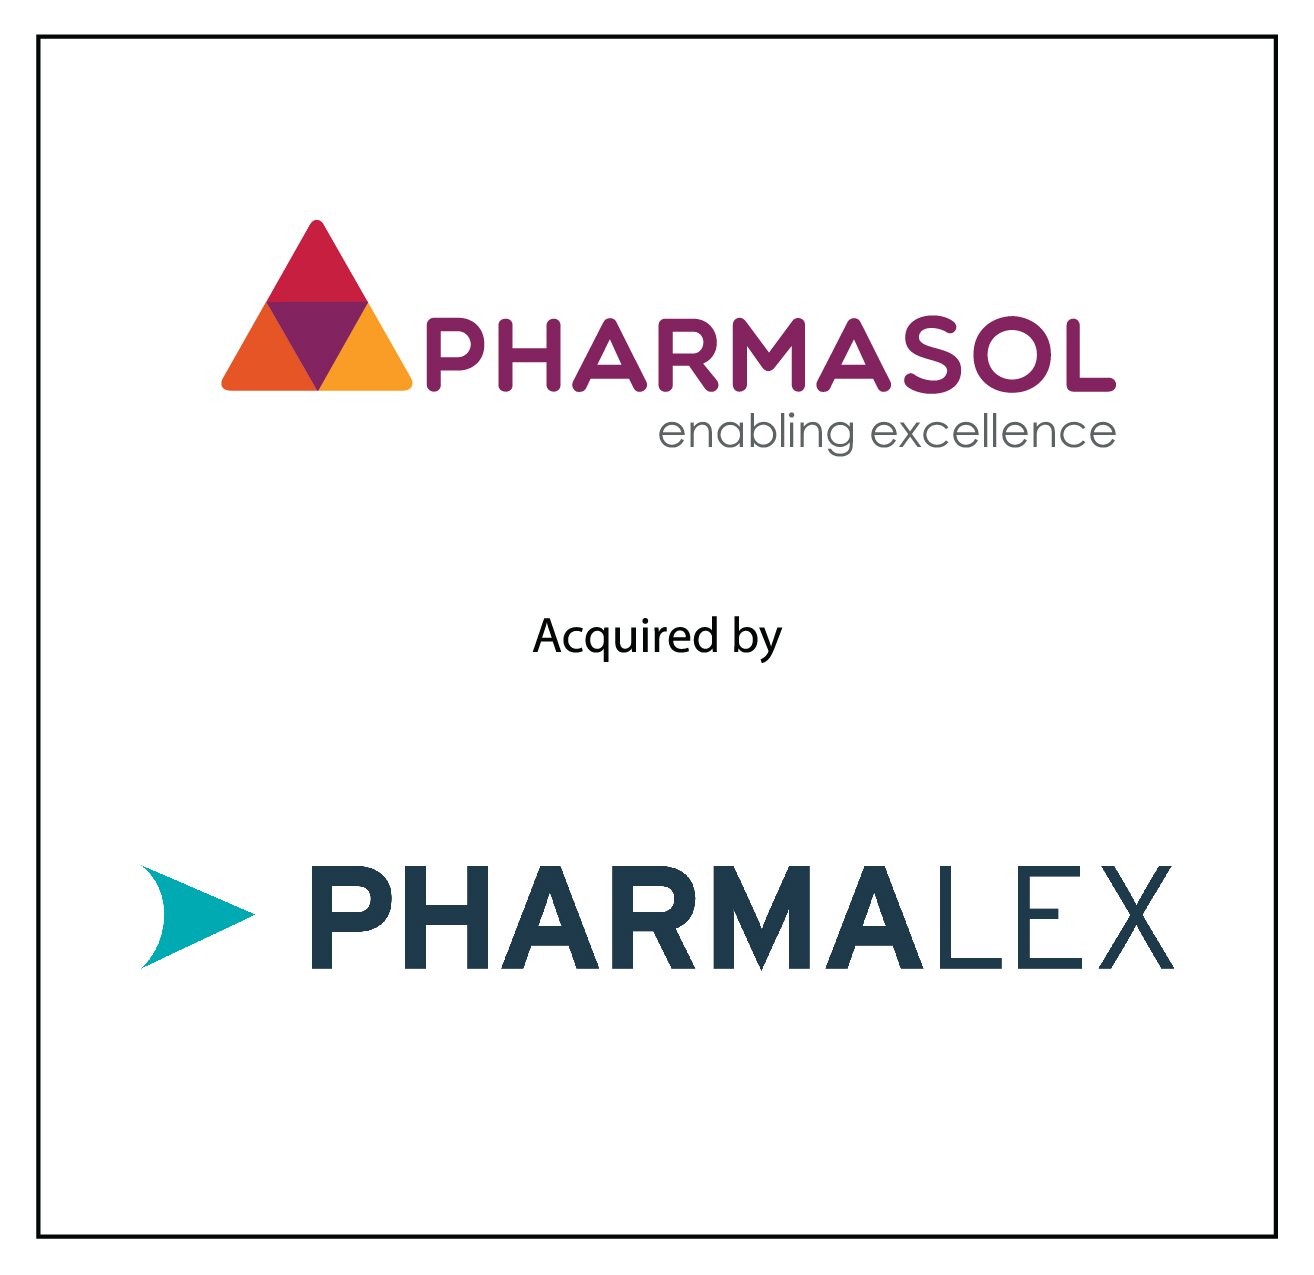 pharmasol Acquired by PharmaLex to Offer Turnkey End-to-End Pharmacovigilance Solutions